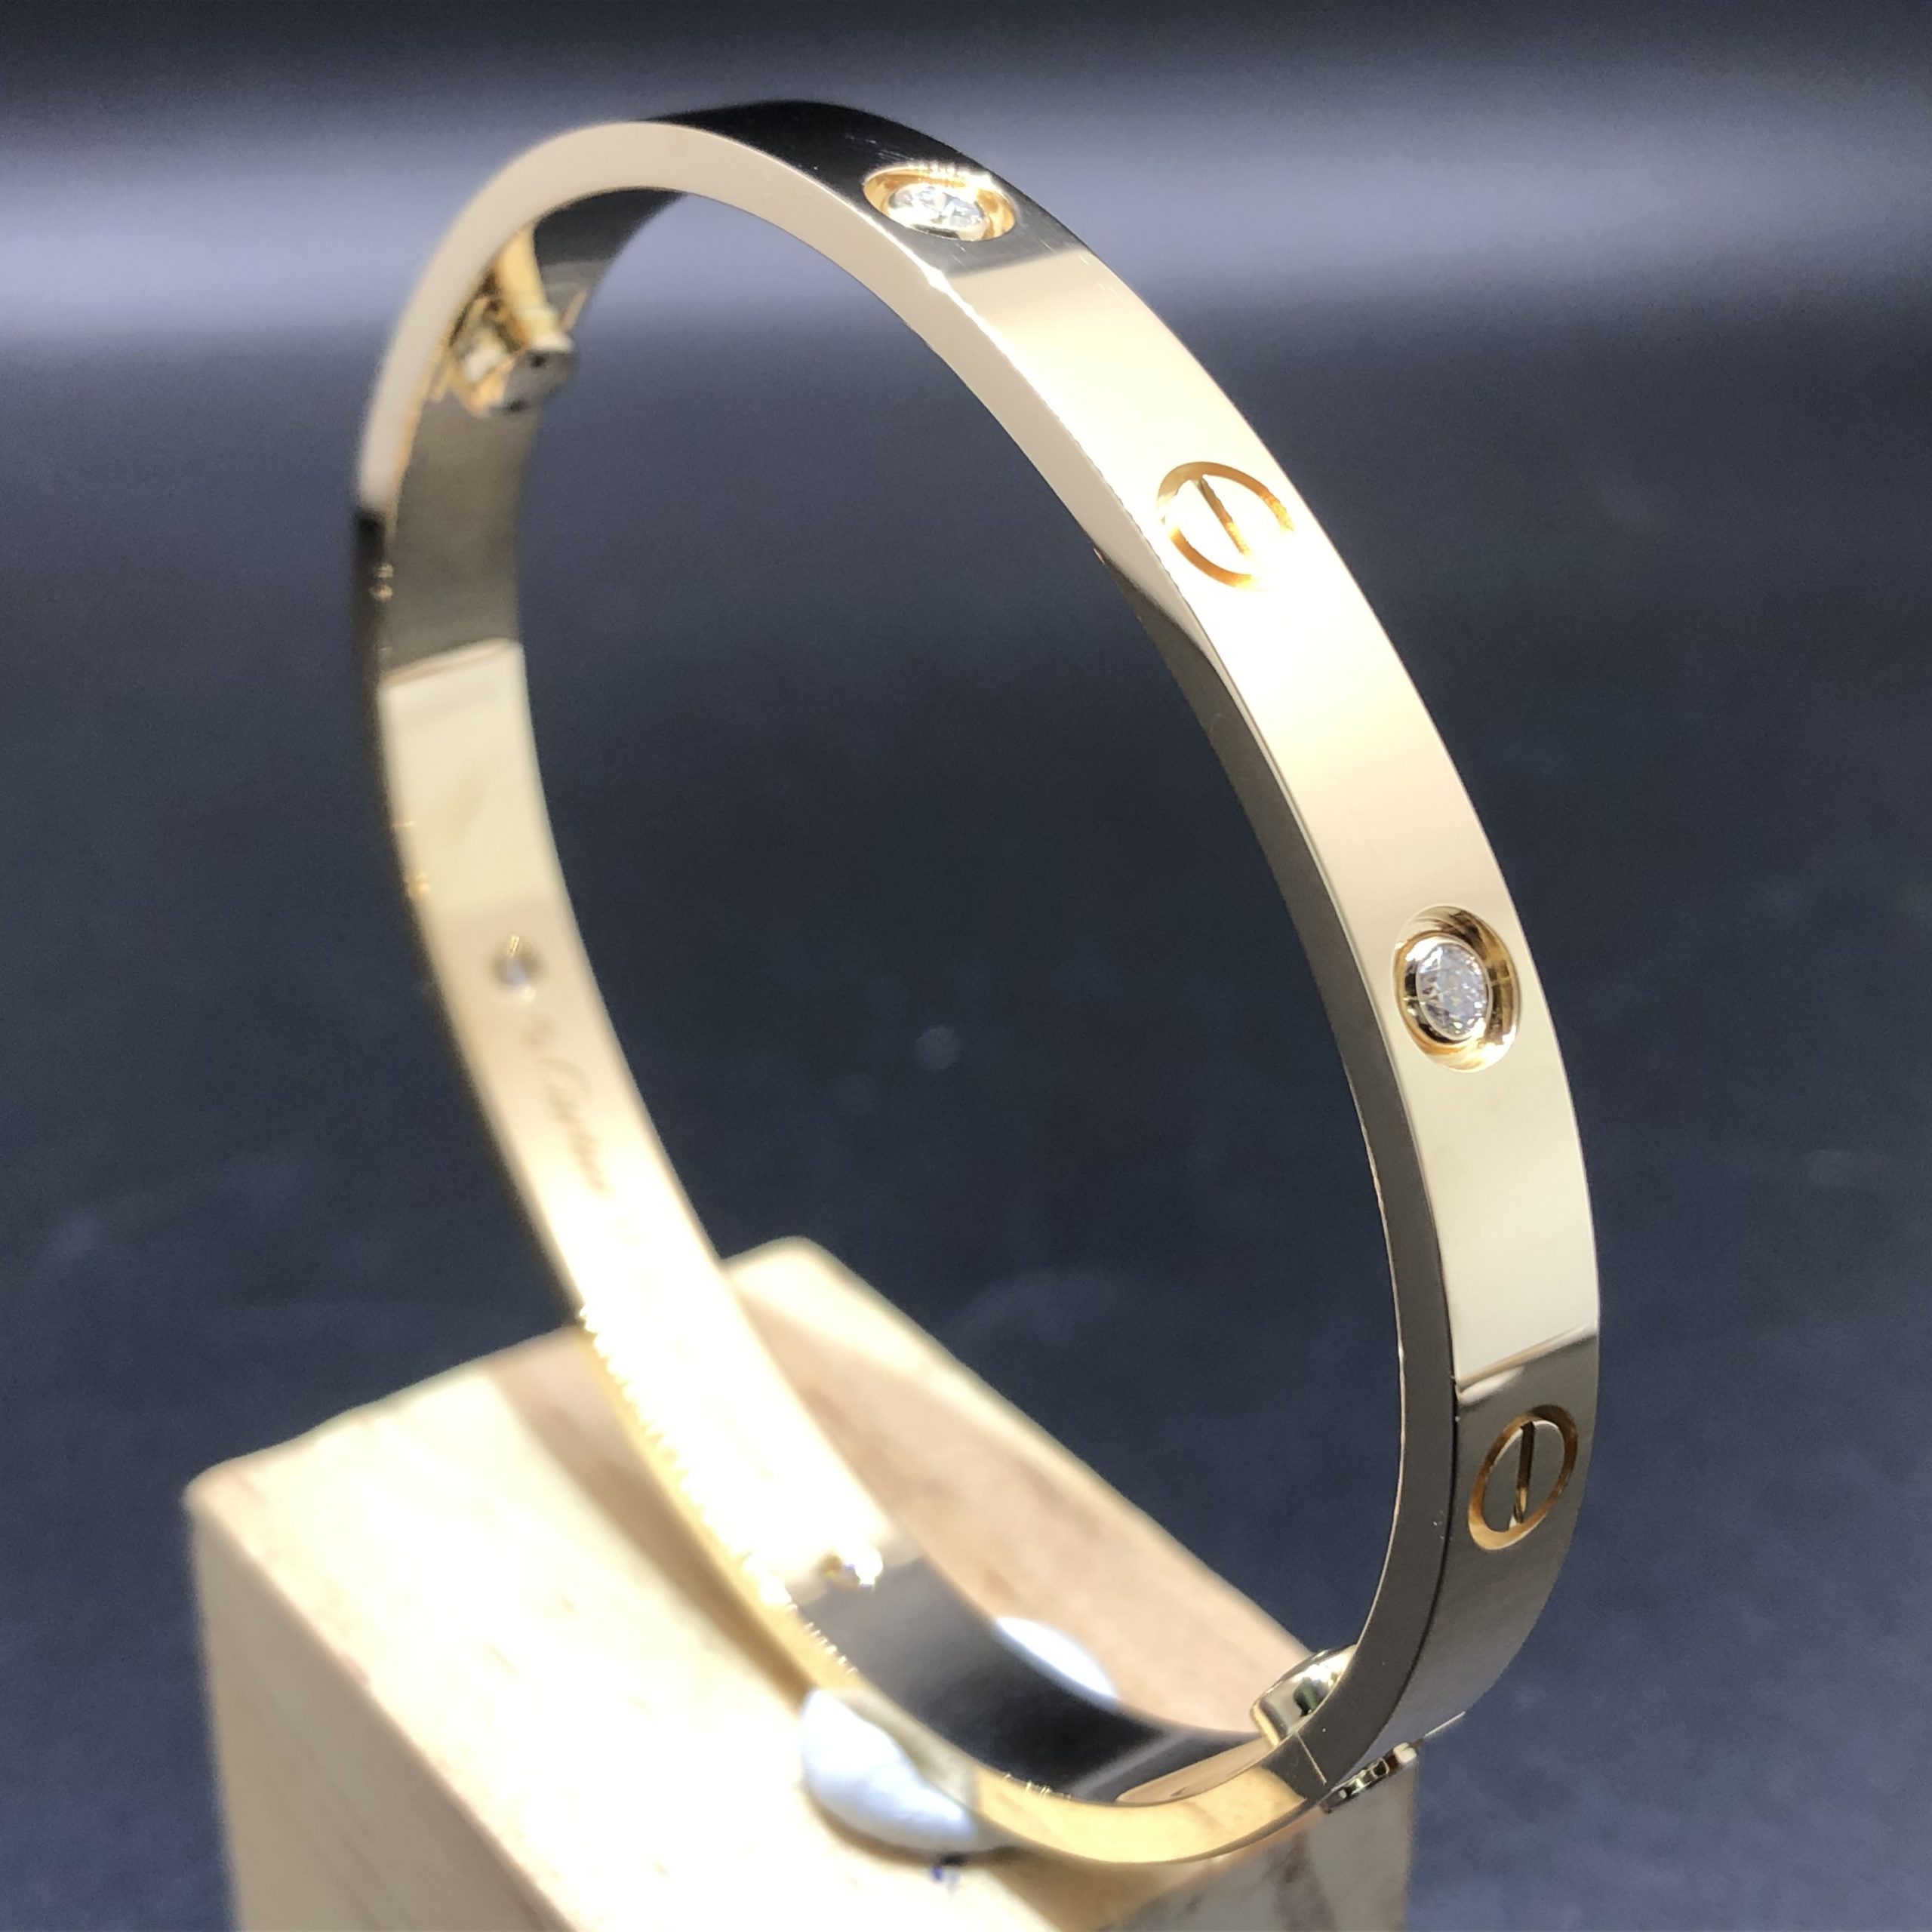 Cartier Love Bracelet Custom Made in Solid 18K Yellow Gold with 4 Diamonds